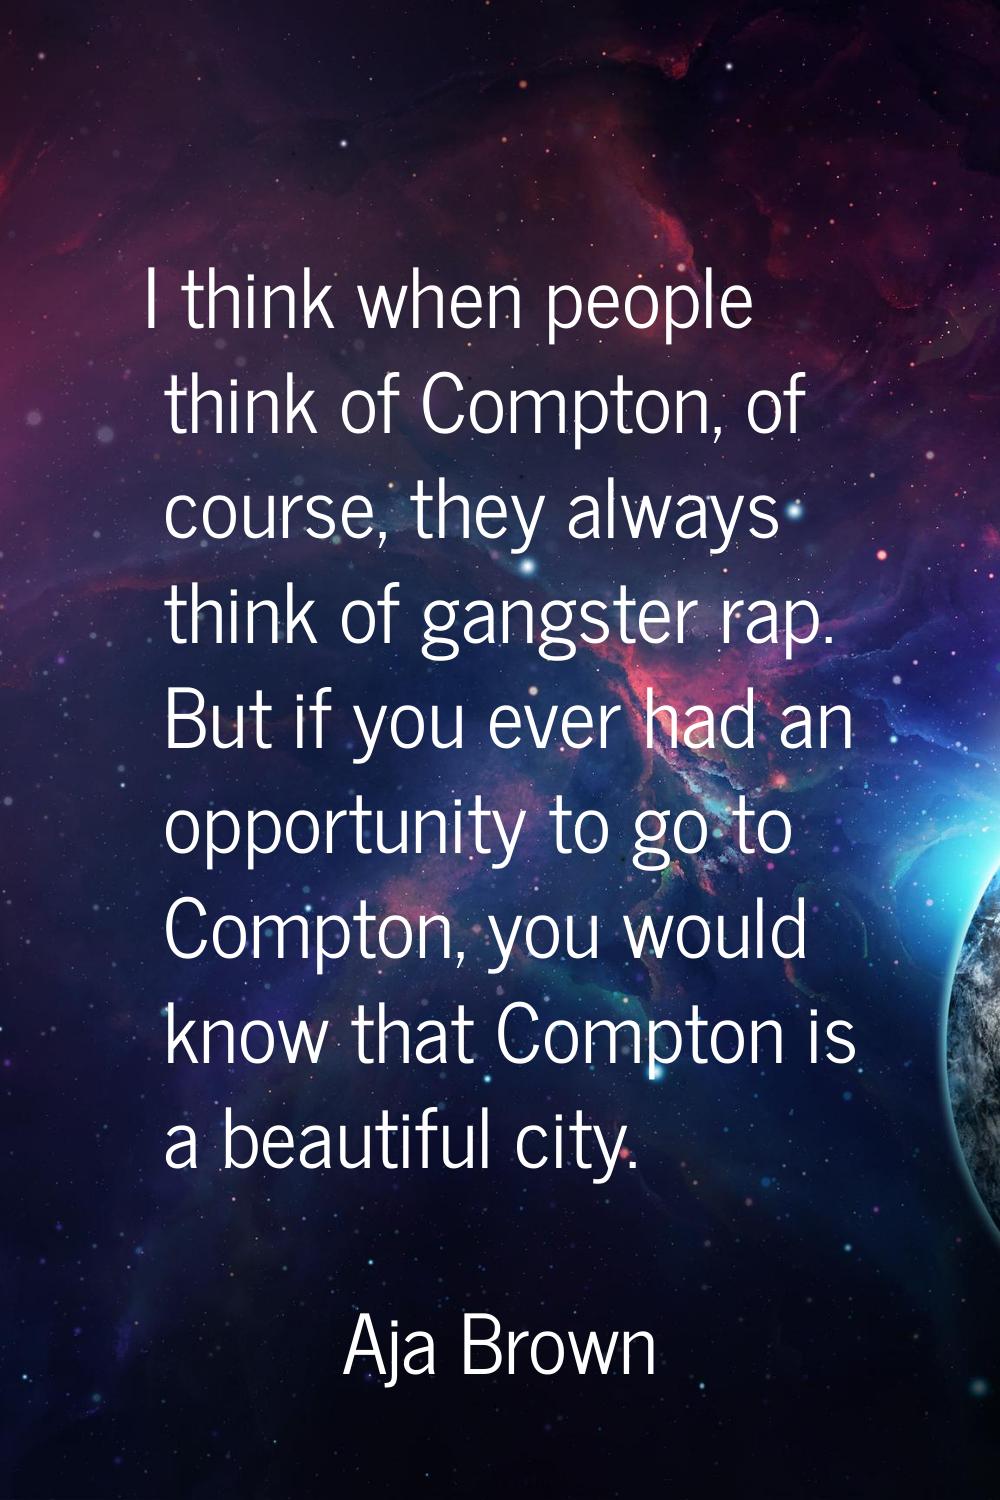 I think when people think of Compton, of course, they always think of gangster rap. But if you ever